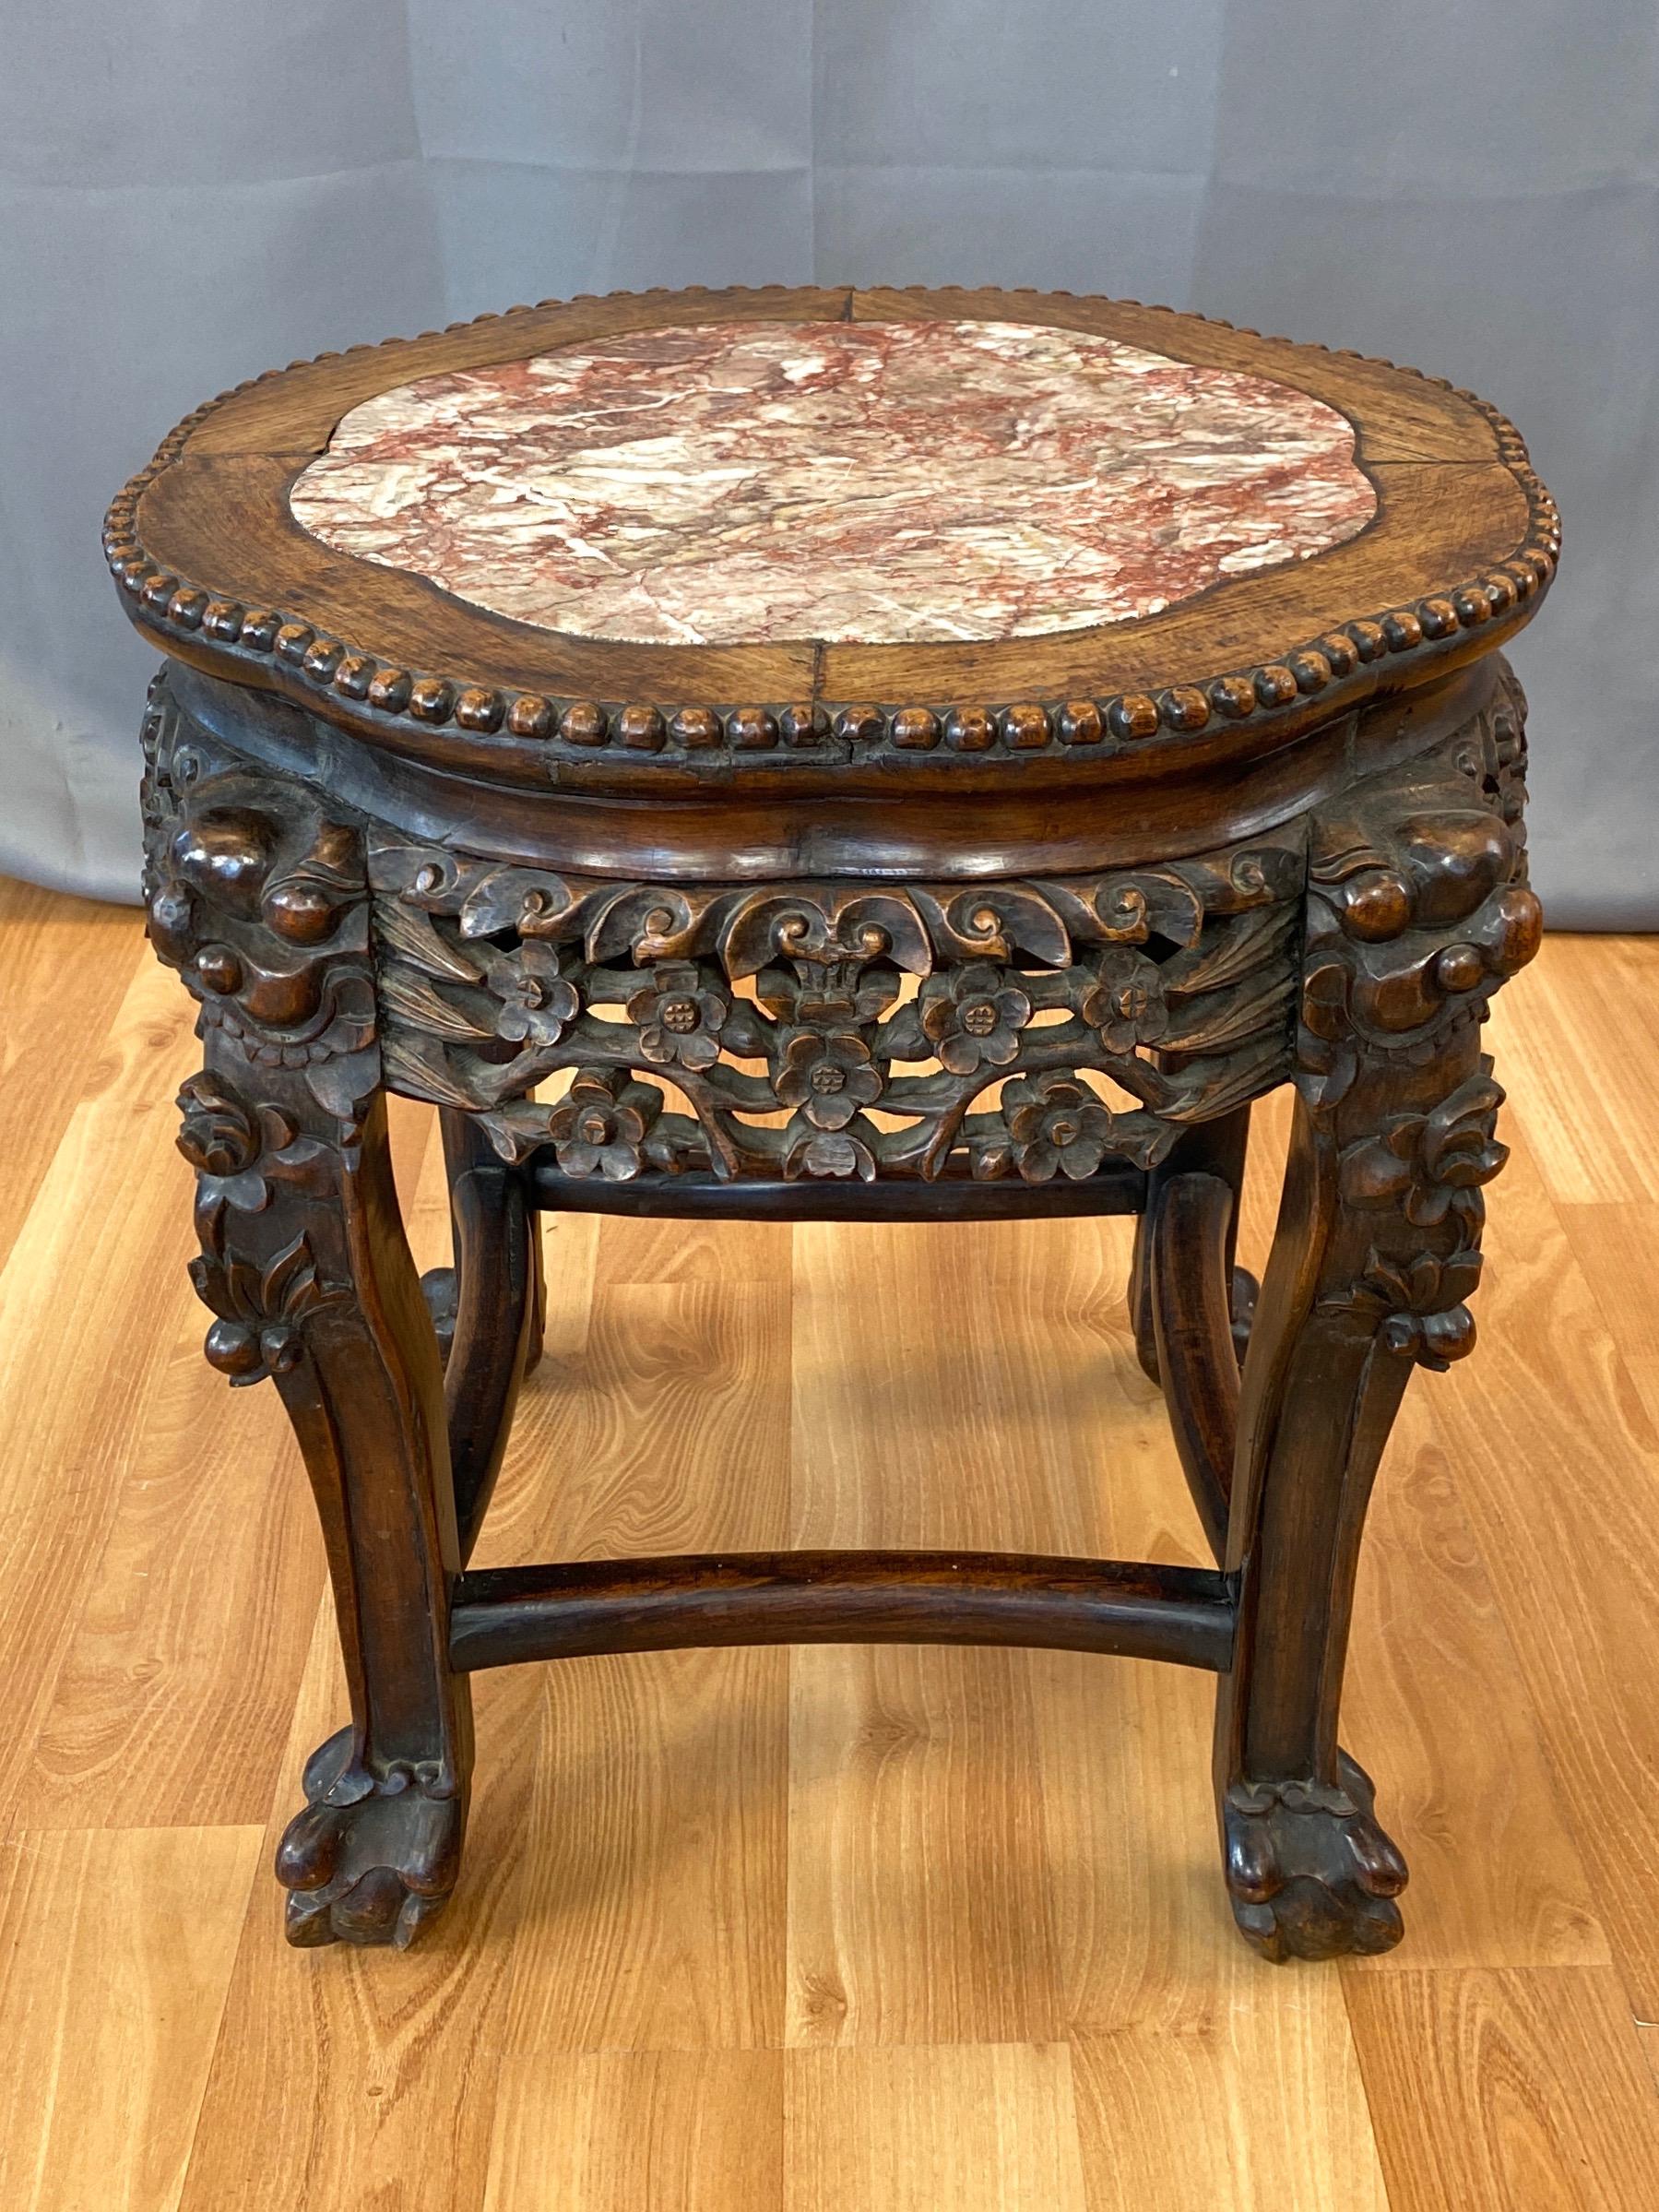 A very handsome circa 1900 Chinese hand carved huanghuali rosewood and marble plant stand, side table, or stool.

Endearingly stout form with finely executed traditional motifs on wonderful display throughout. Top with beaded edge above an open